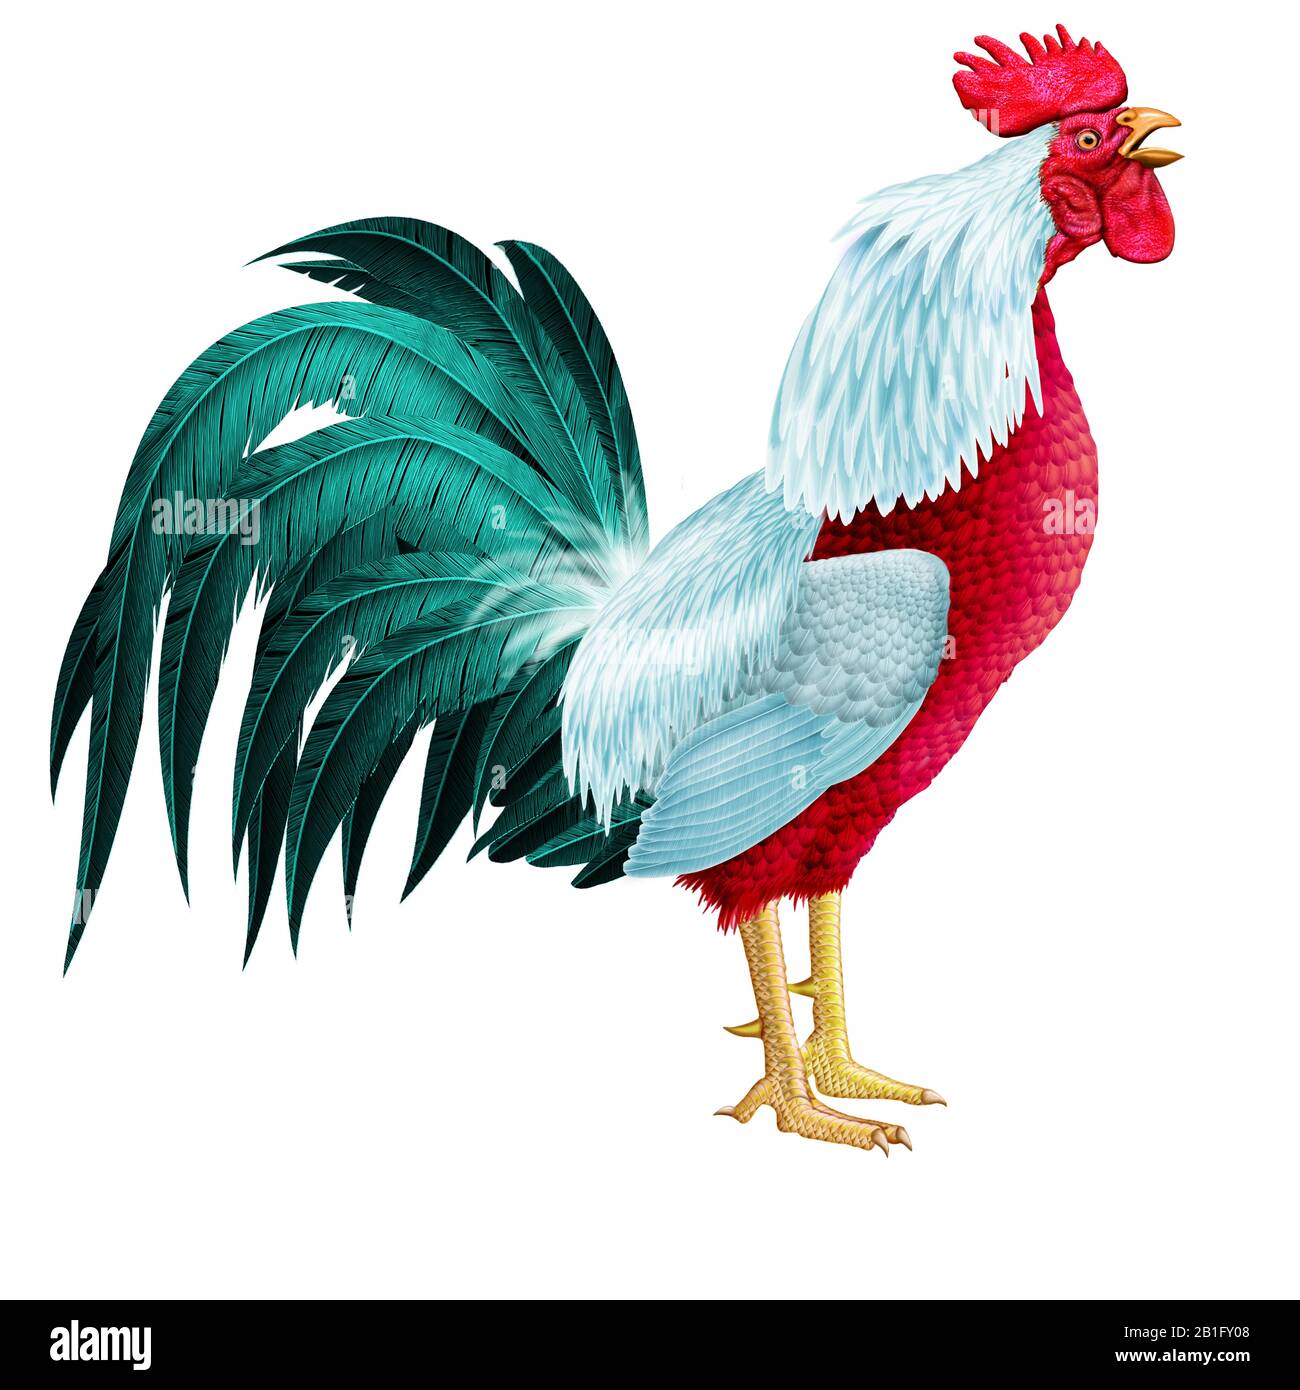 Rooster illustration realistic design Stock Photo - Alamy